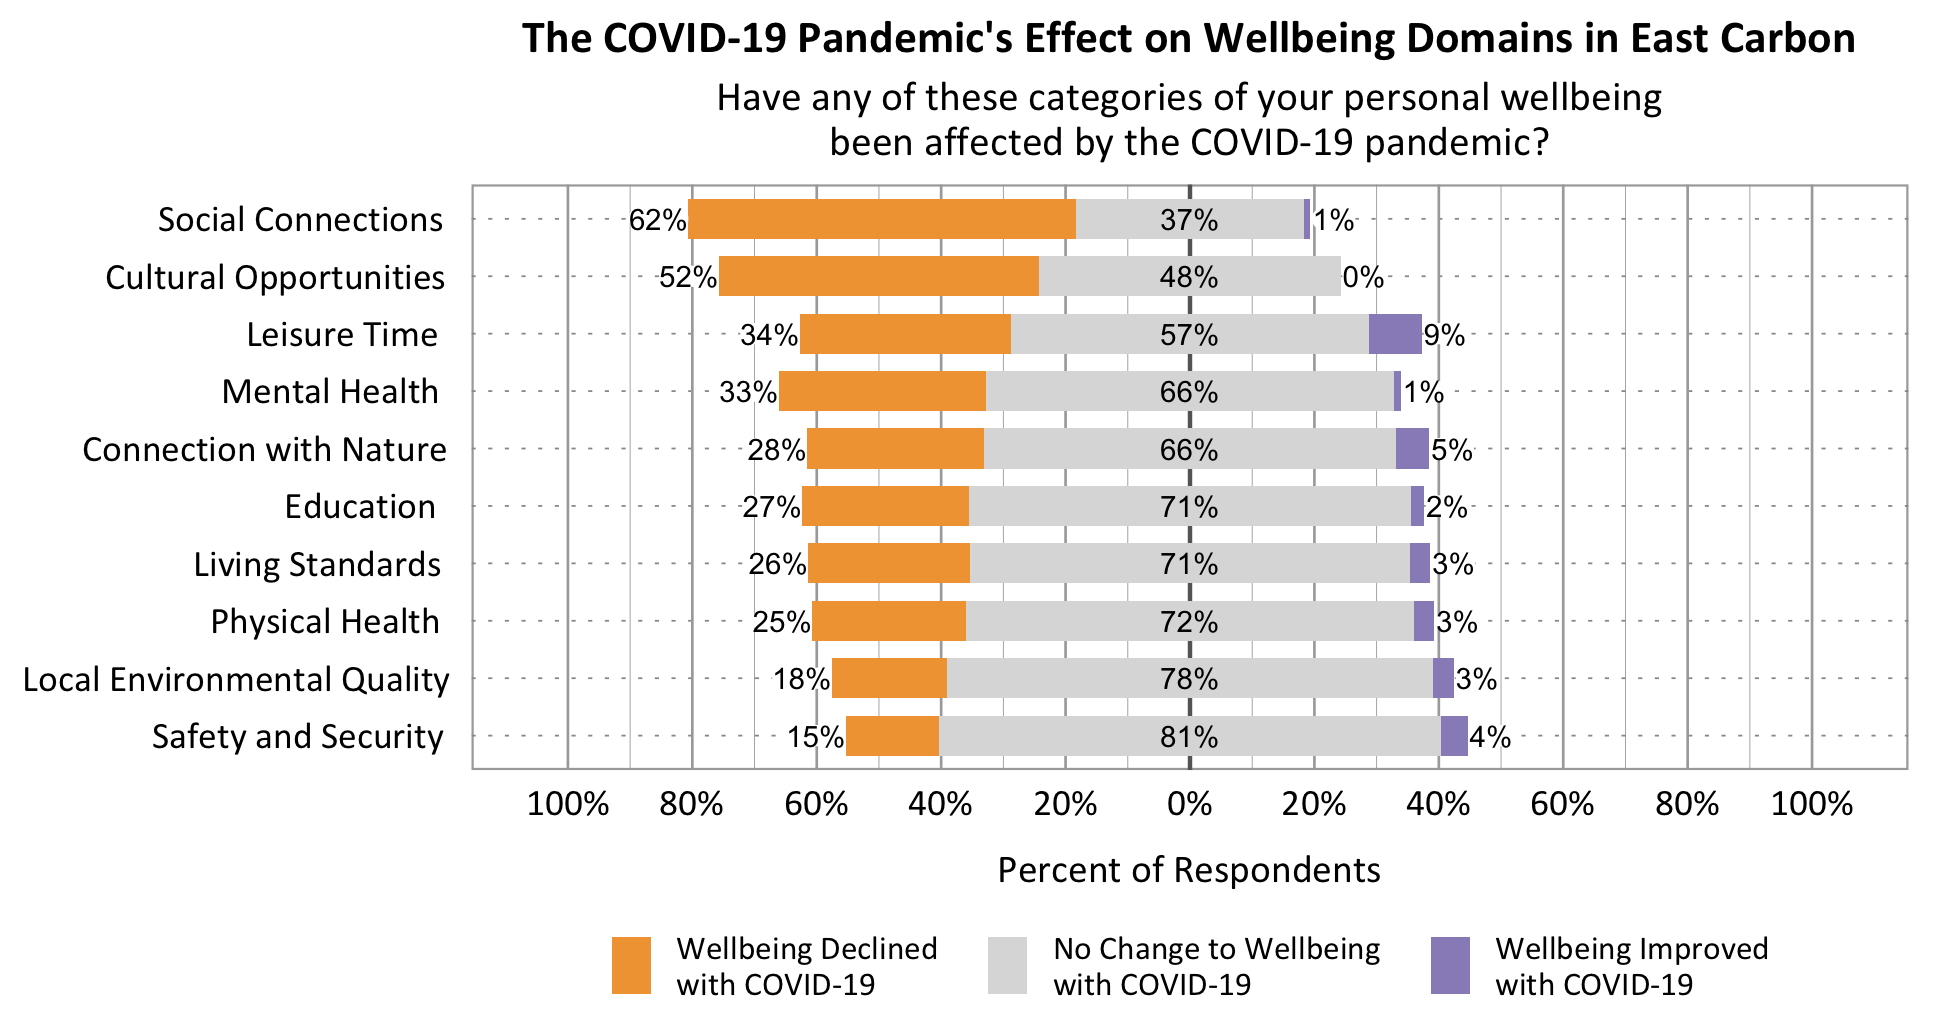 Likert Graph. Title: The COVID-19 Pandemic's effect on wellbeing domains in East Carbon. Subtitle: Have any of these categories of your personal wellbeing been affected by the COVID-19 pandemic? Data – Category: Social Connections- 62% of respondents rated wellbeing declined with COVID-19, 37% of respondents rated no change to wellbeing with COVID-19, 1% of respondents rated wellbeing improved with COVID-19; Category: Cultural Opportunities- 52% of respondents rated wellbeing declined with COVID-19, 48% of respondents rated no change to wellbeing with COVID-19, 0% of respondents rated wellbeing improved with COVID-19; Category: Mental Health- 33% of respondents rated wellbeing declined with COVID-19, 66% of respondents rated no change to wellbeing with COVID-19, 1% of respondents rated wellbeing improved with COVID-19; Category: Leisure Time- 34% of respondents rated wellbeing declined with COVID-19, 57% of respondents rated no change to wellbeing with COVID-19, 9% of respondents rated wellbeing improved with COVID-19; Category: Physical Health - 25% of respondents rated wellbeing declined with COVID-19, 72% of respondents rated no change to wellbeing with COVID-19, 3% of respondents rated wellbeing improved with COVID-19; Category: Connection with Nature- 28% of respondents rated wellbeing declined with COVID-19, 66% of respondents rated no change to wellbeing with COVID-19, 5% of respondents rated wellbeing improved with COVID-19; Category: Education- 27% of respondents rated wellbeing declined with COVID-19, 71% of respondents rated no change to wellbeing with COVID-19, 2% of respondents rated wellbeing improved with COVID-19; Category: Living Standards- 26% of respondents rated wellbeing declined with COVID-19, 71% of respondents rated no change to wellbeing with COVID-19, 3% of respondents rated wellbeing improved with COVID-19; Category:  Local Environmental Quality- 18% of respondents rated wellbeing declined with COVID-19, 78% of respondents rated no change to wellbeing with COVID-19, 3% of respondents rated wellbeing improved with COVID-19; Category: Safety and Security- 15% of respondents rated wellbeing declined with COVID-19, 81% of respondents rated no change to wellbeing with COVID-19, 4% of respondents rated wellbeing improved with COVID-19.